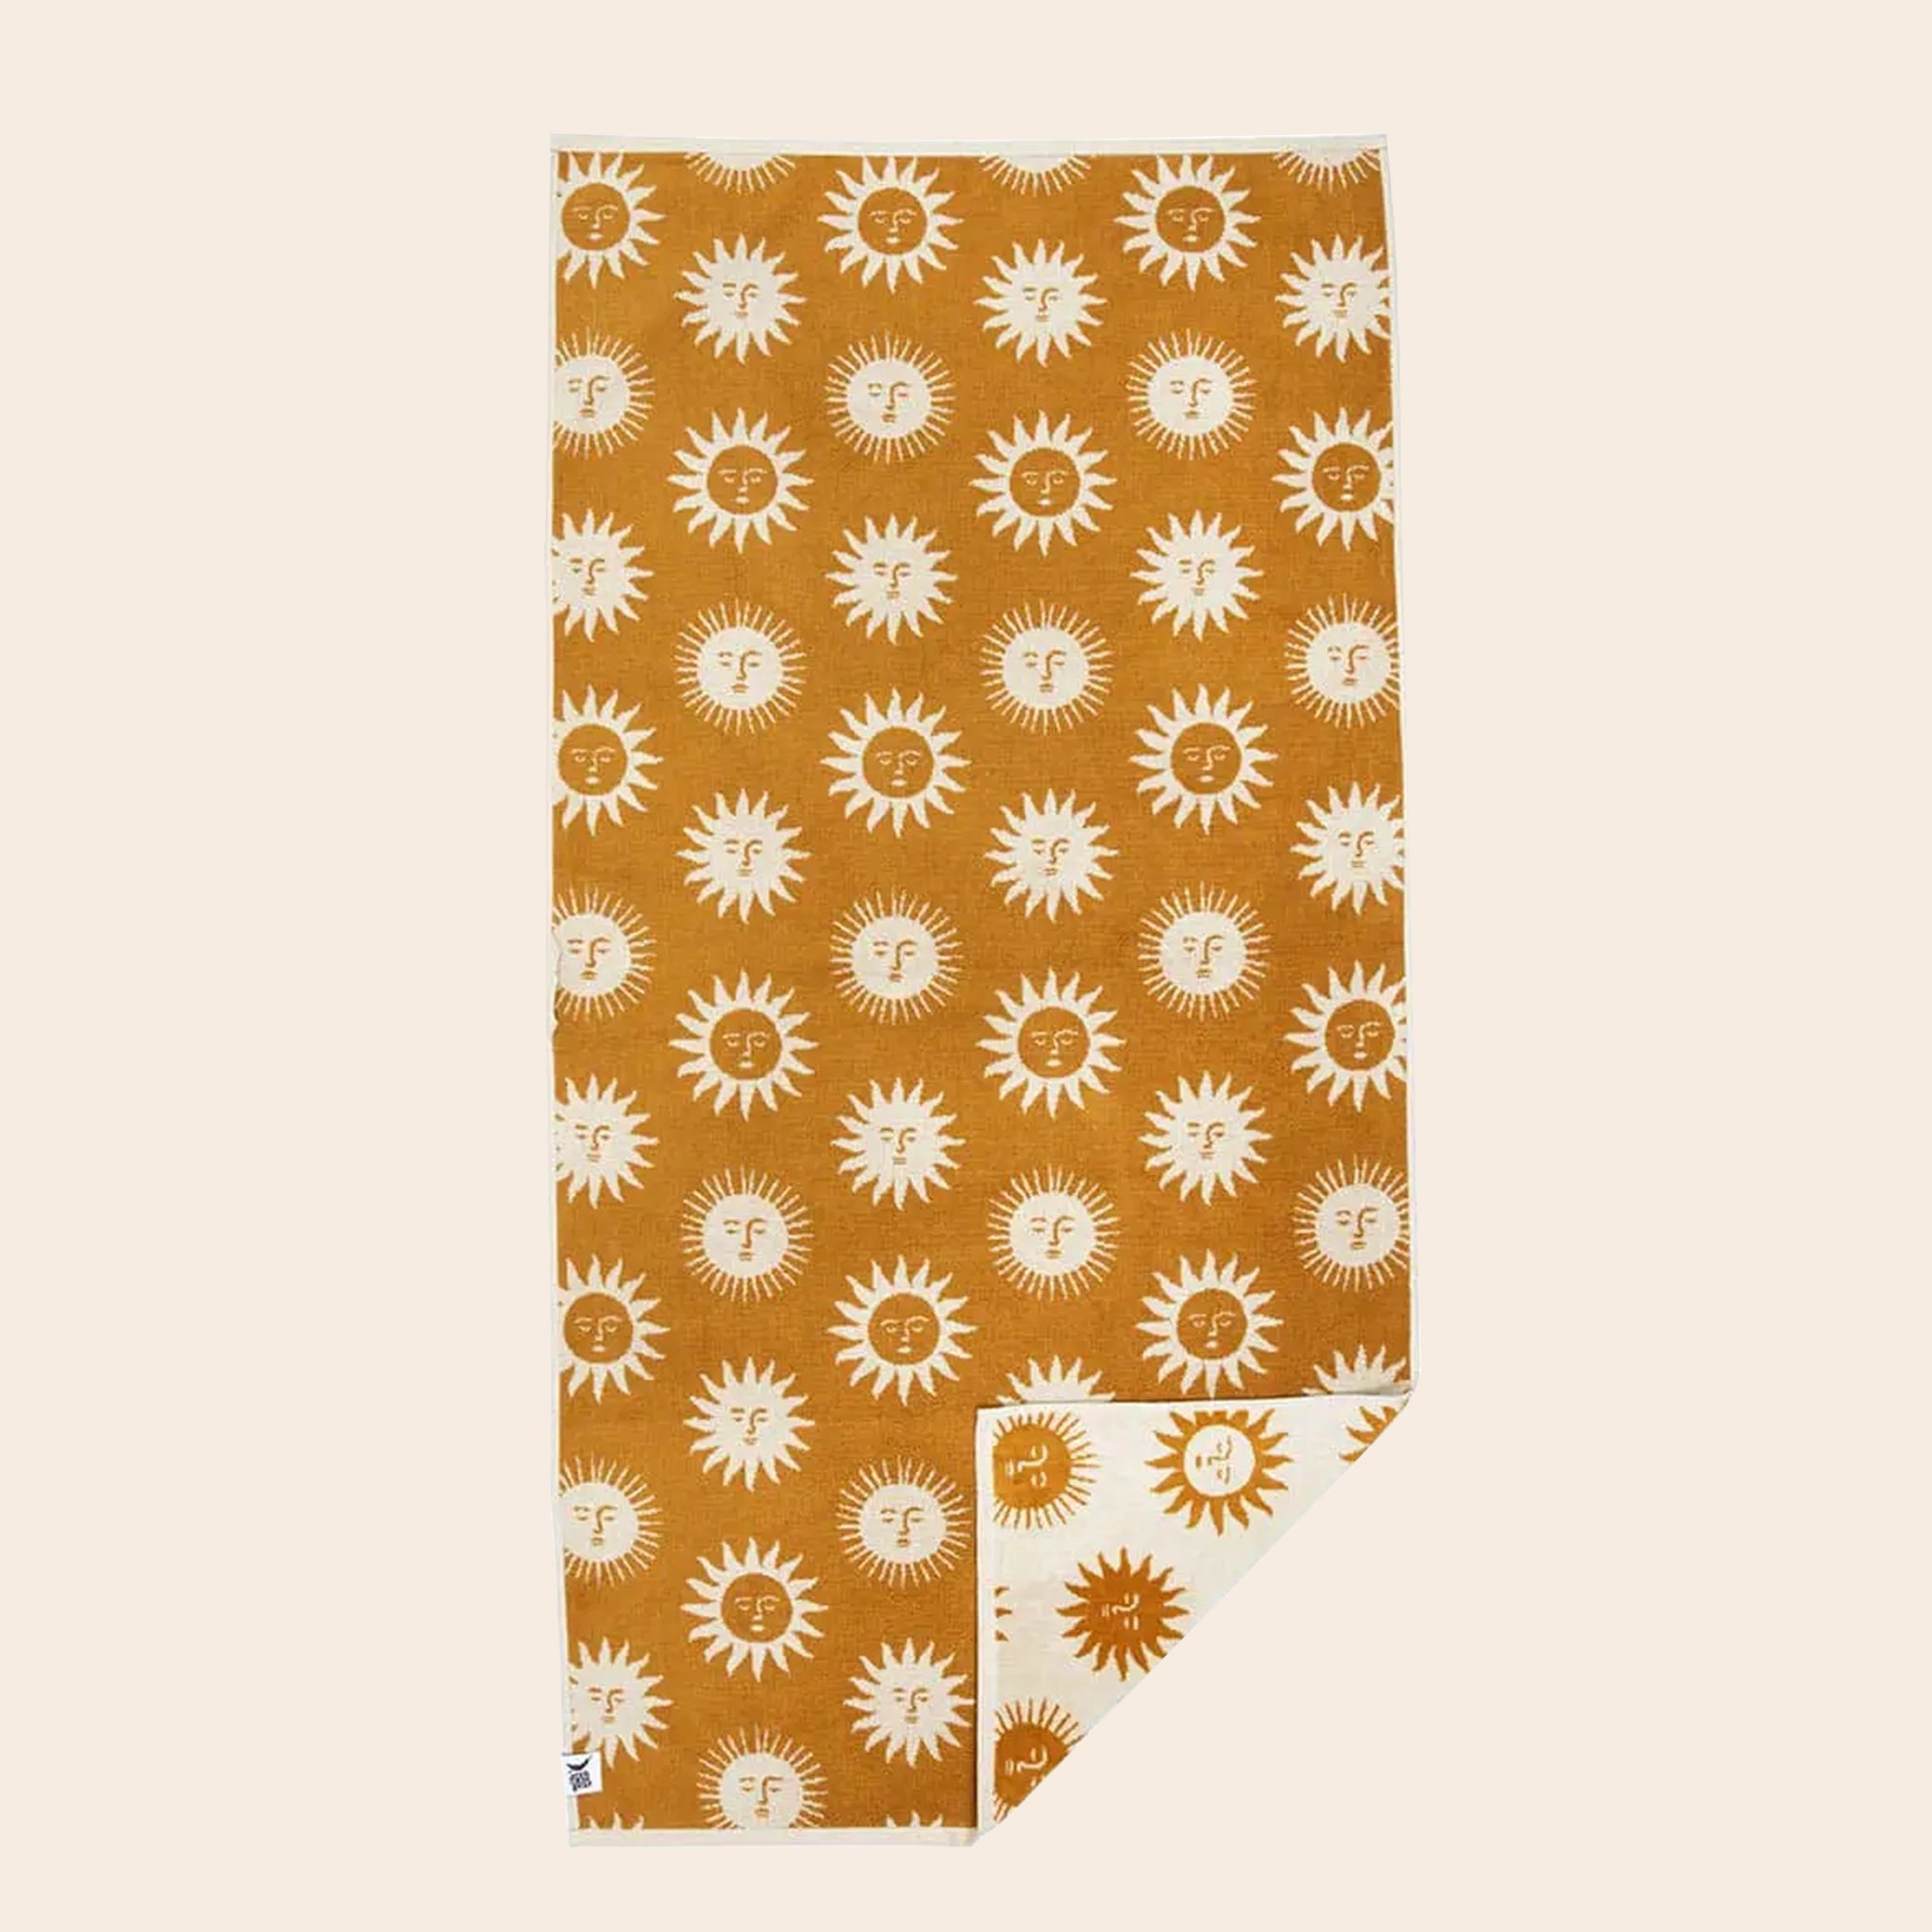 A cream and mustard yellow beach / bath towel with a sun design on the front and back, photographed here with the mustard side facing up and a corner of the towel flipped over to show the opposite cream side. 